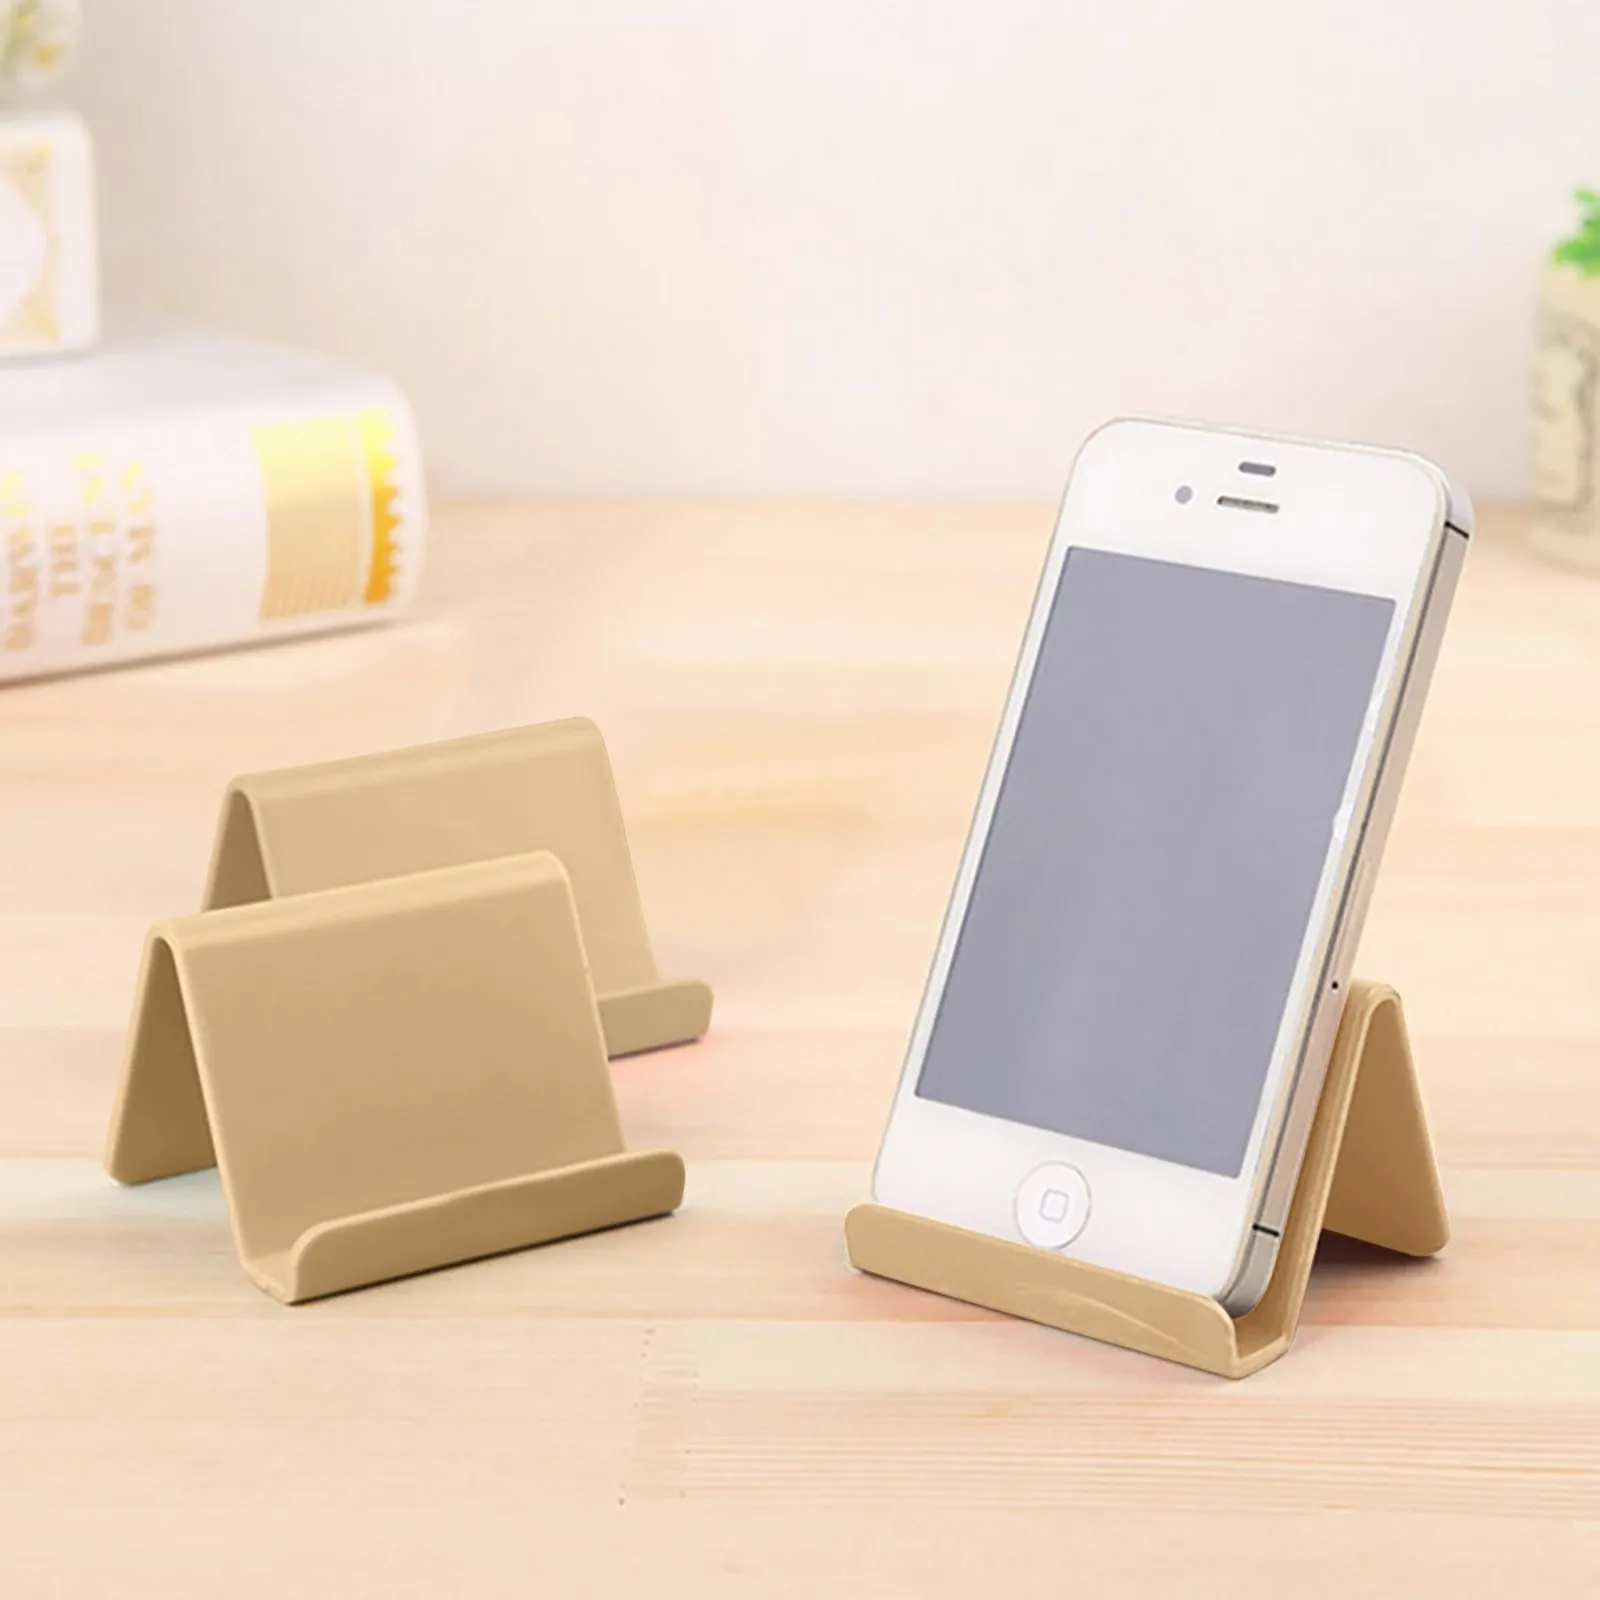 wooden phone stand Universal mobile phone Holder Tablet Stand For iPhone Xiaomi Huawei Samsung holders Candy Portable Mobile accessories Support phone stand for car